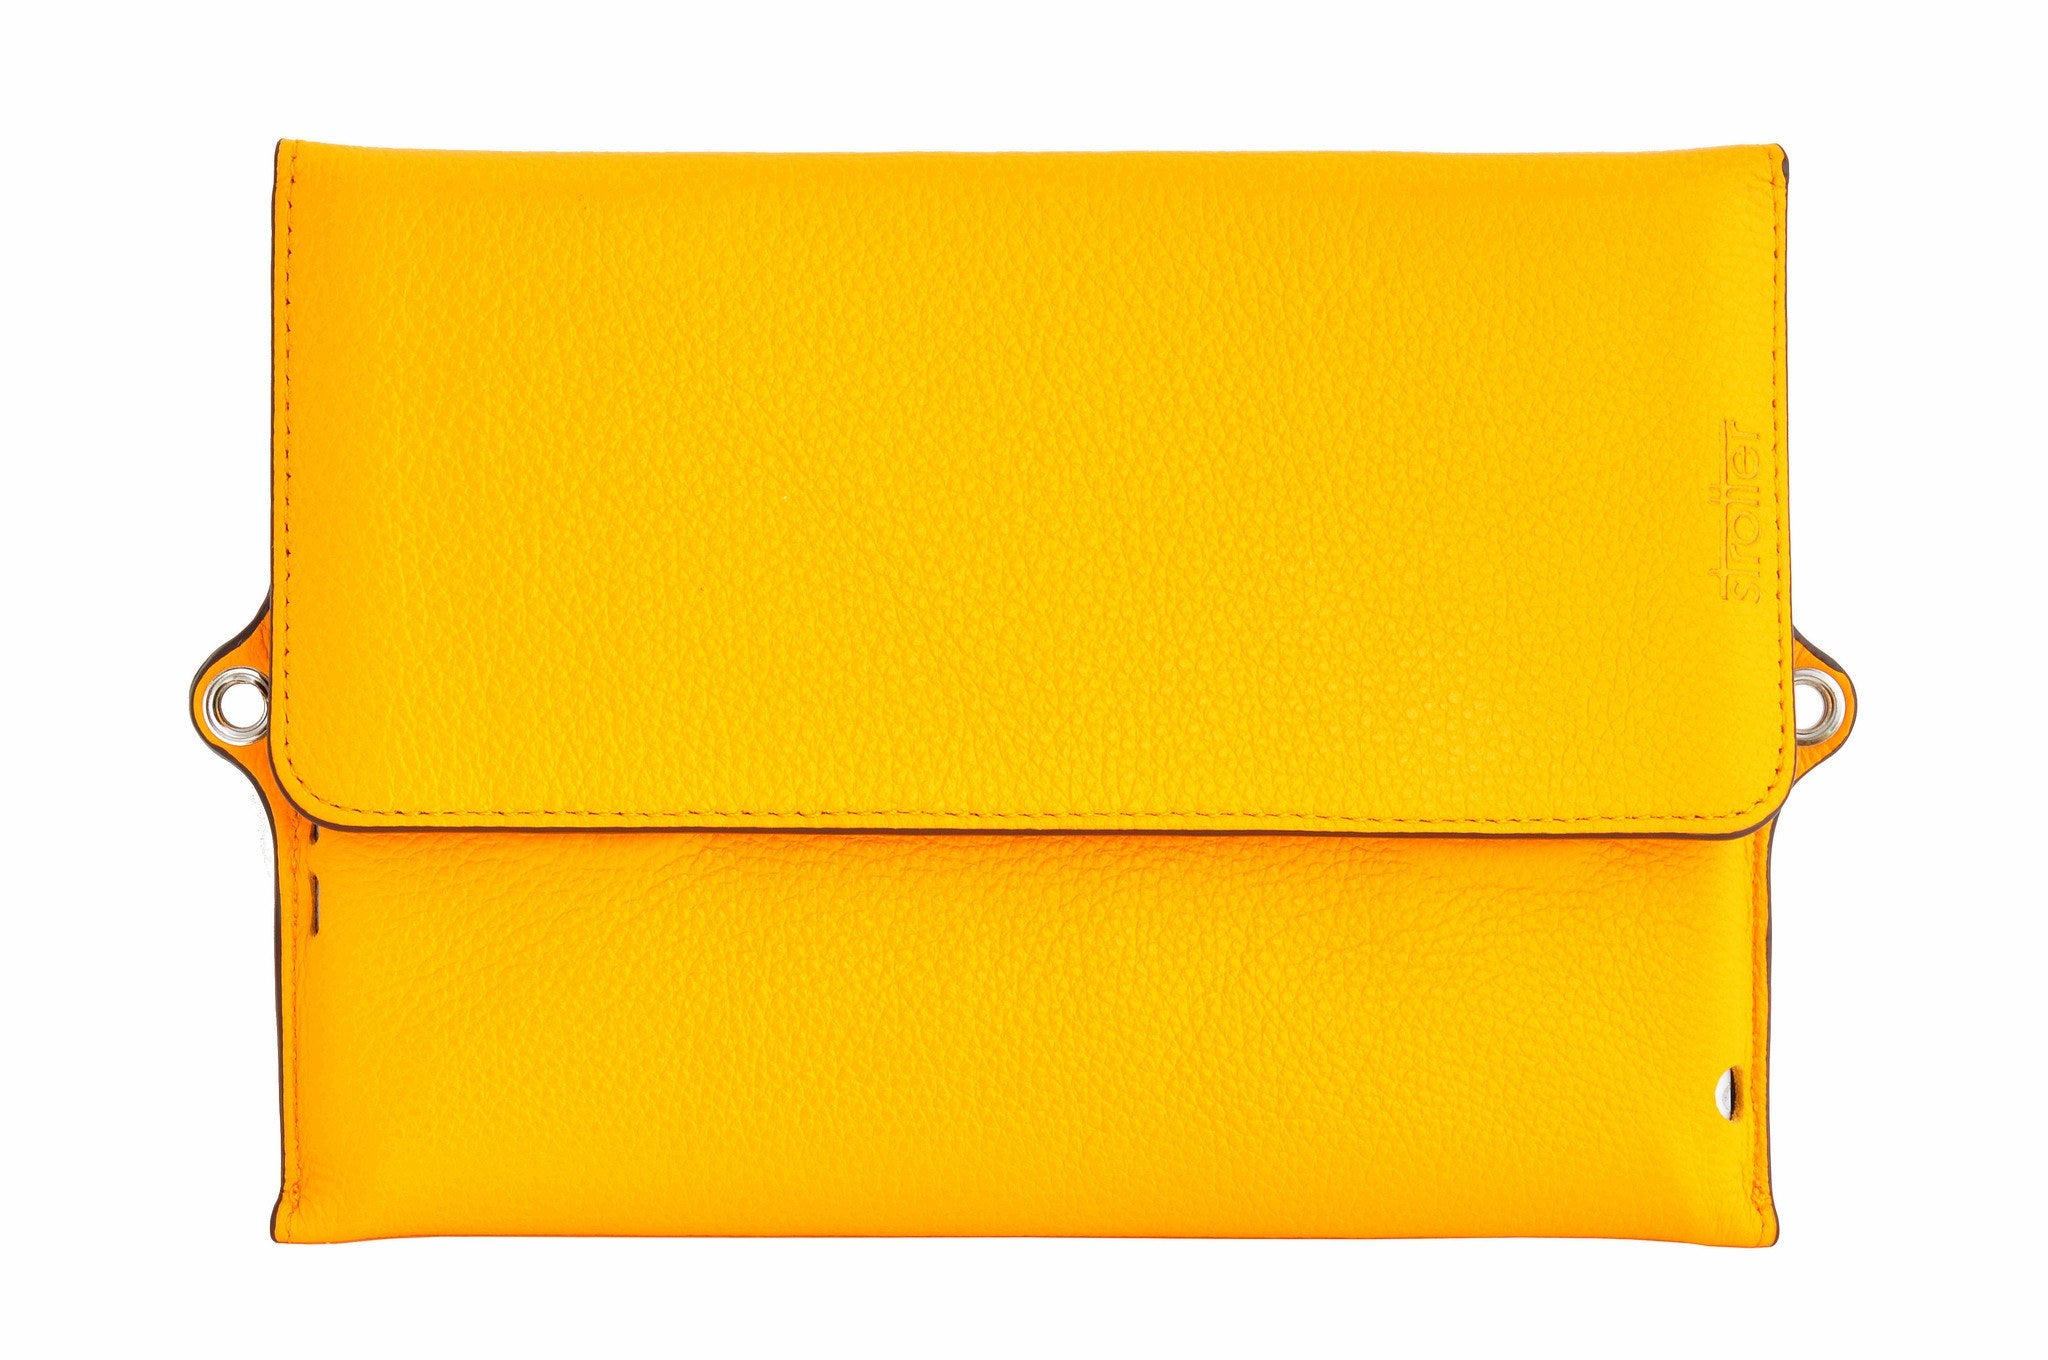 Case for iPad Mini - Across GL (genuine leather) in Sunny Yellow.